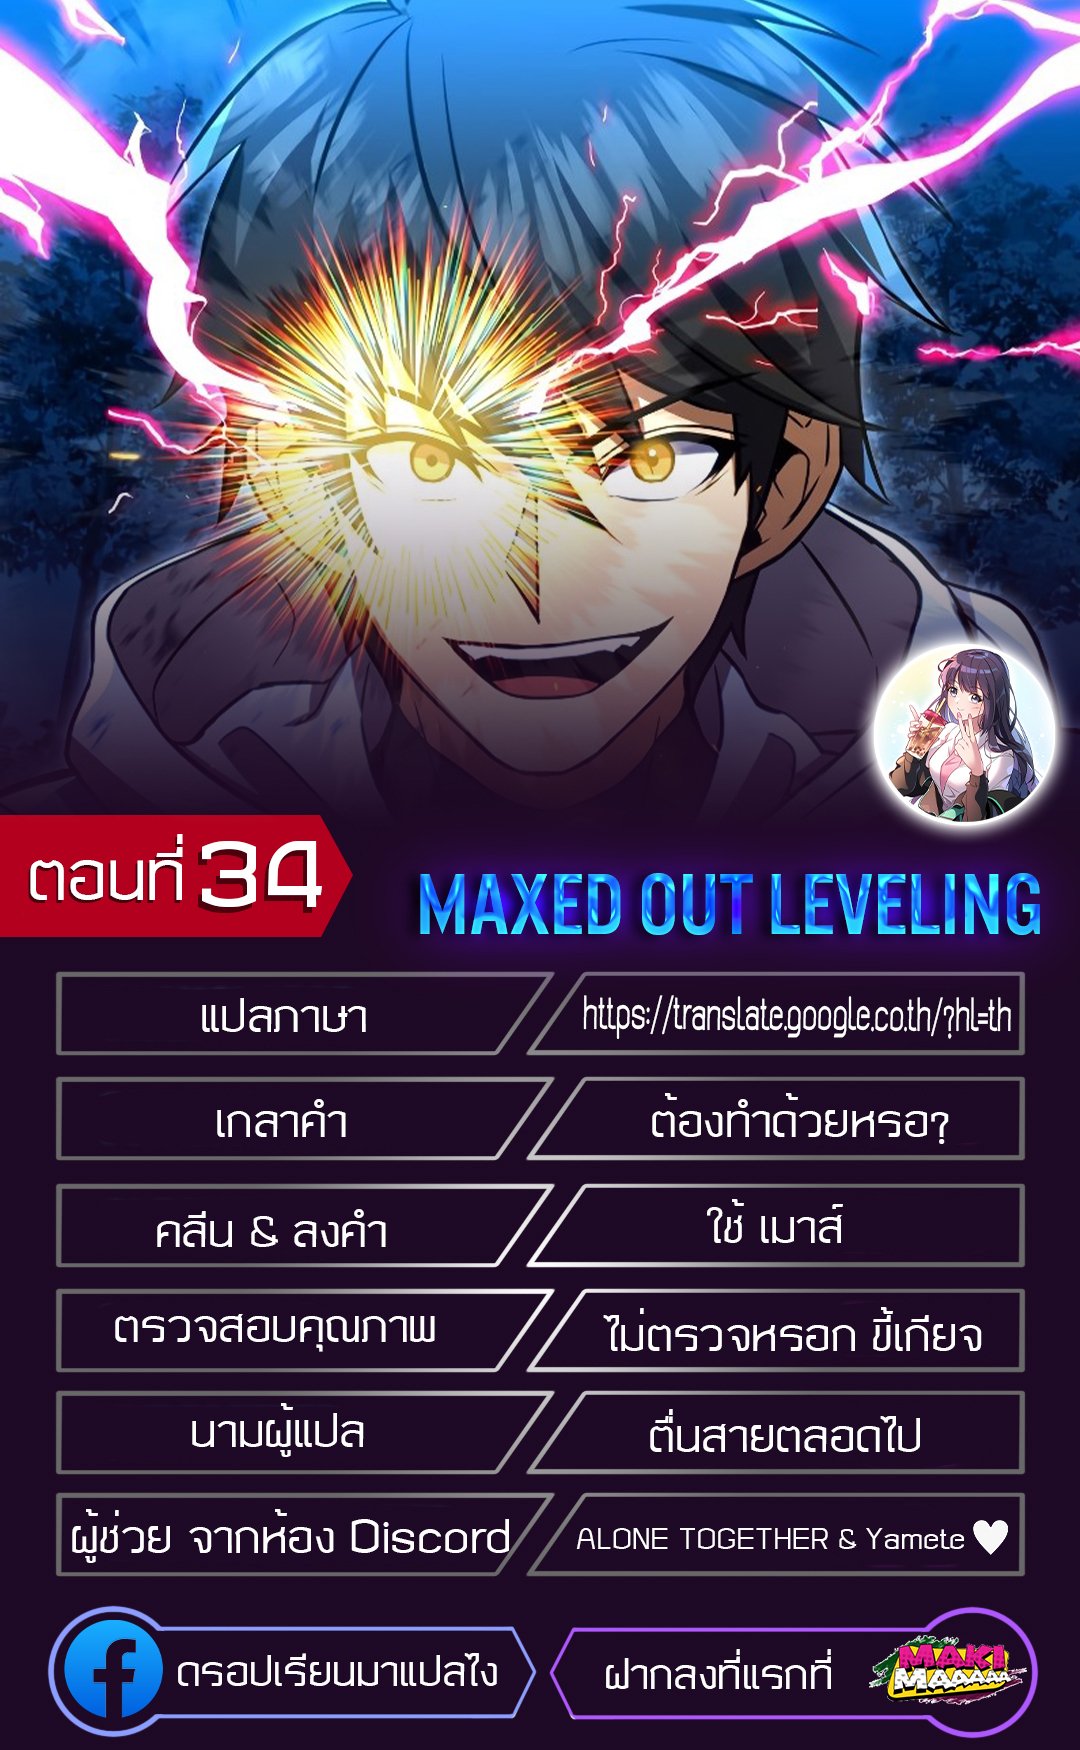 Maxed Out Leveling34 01